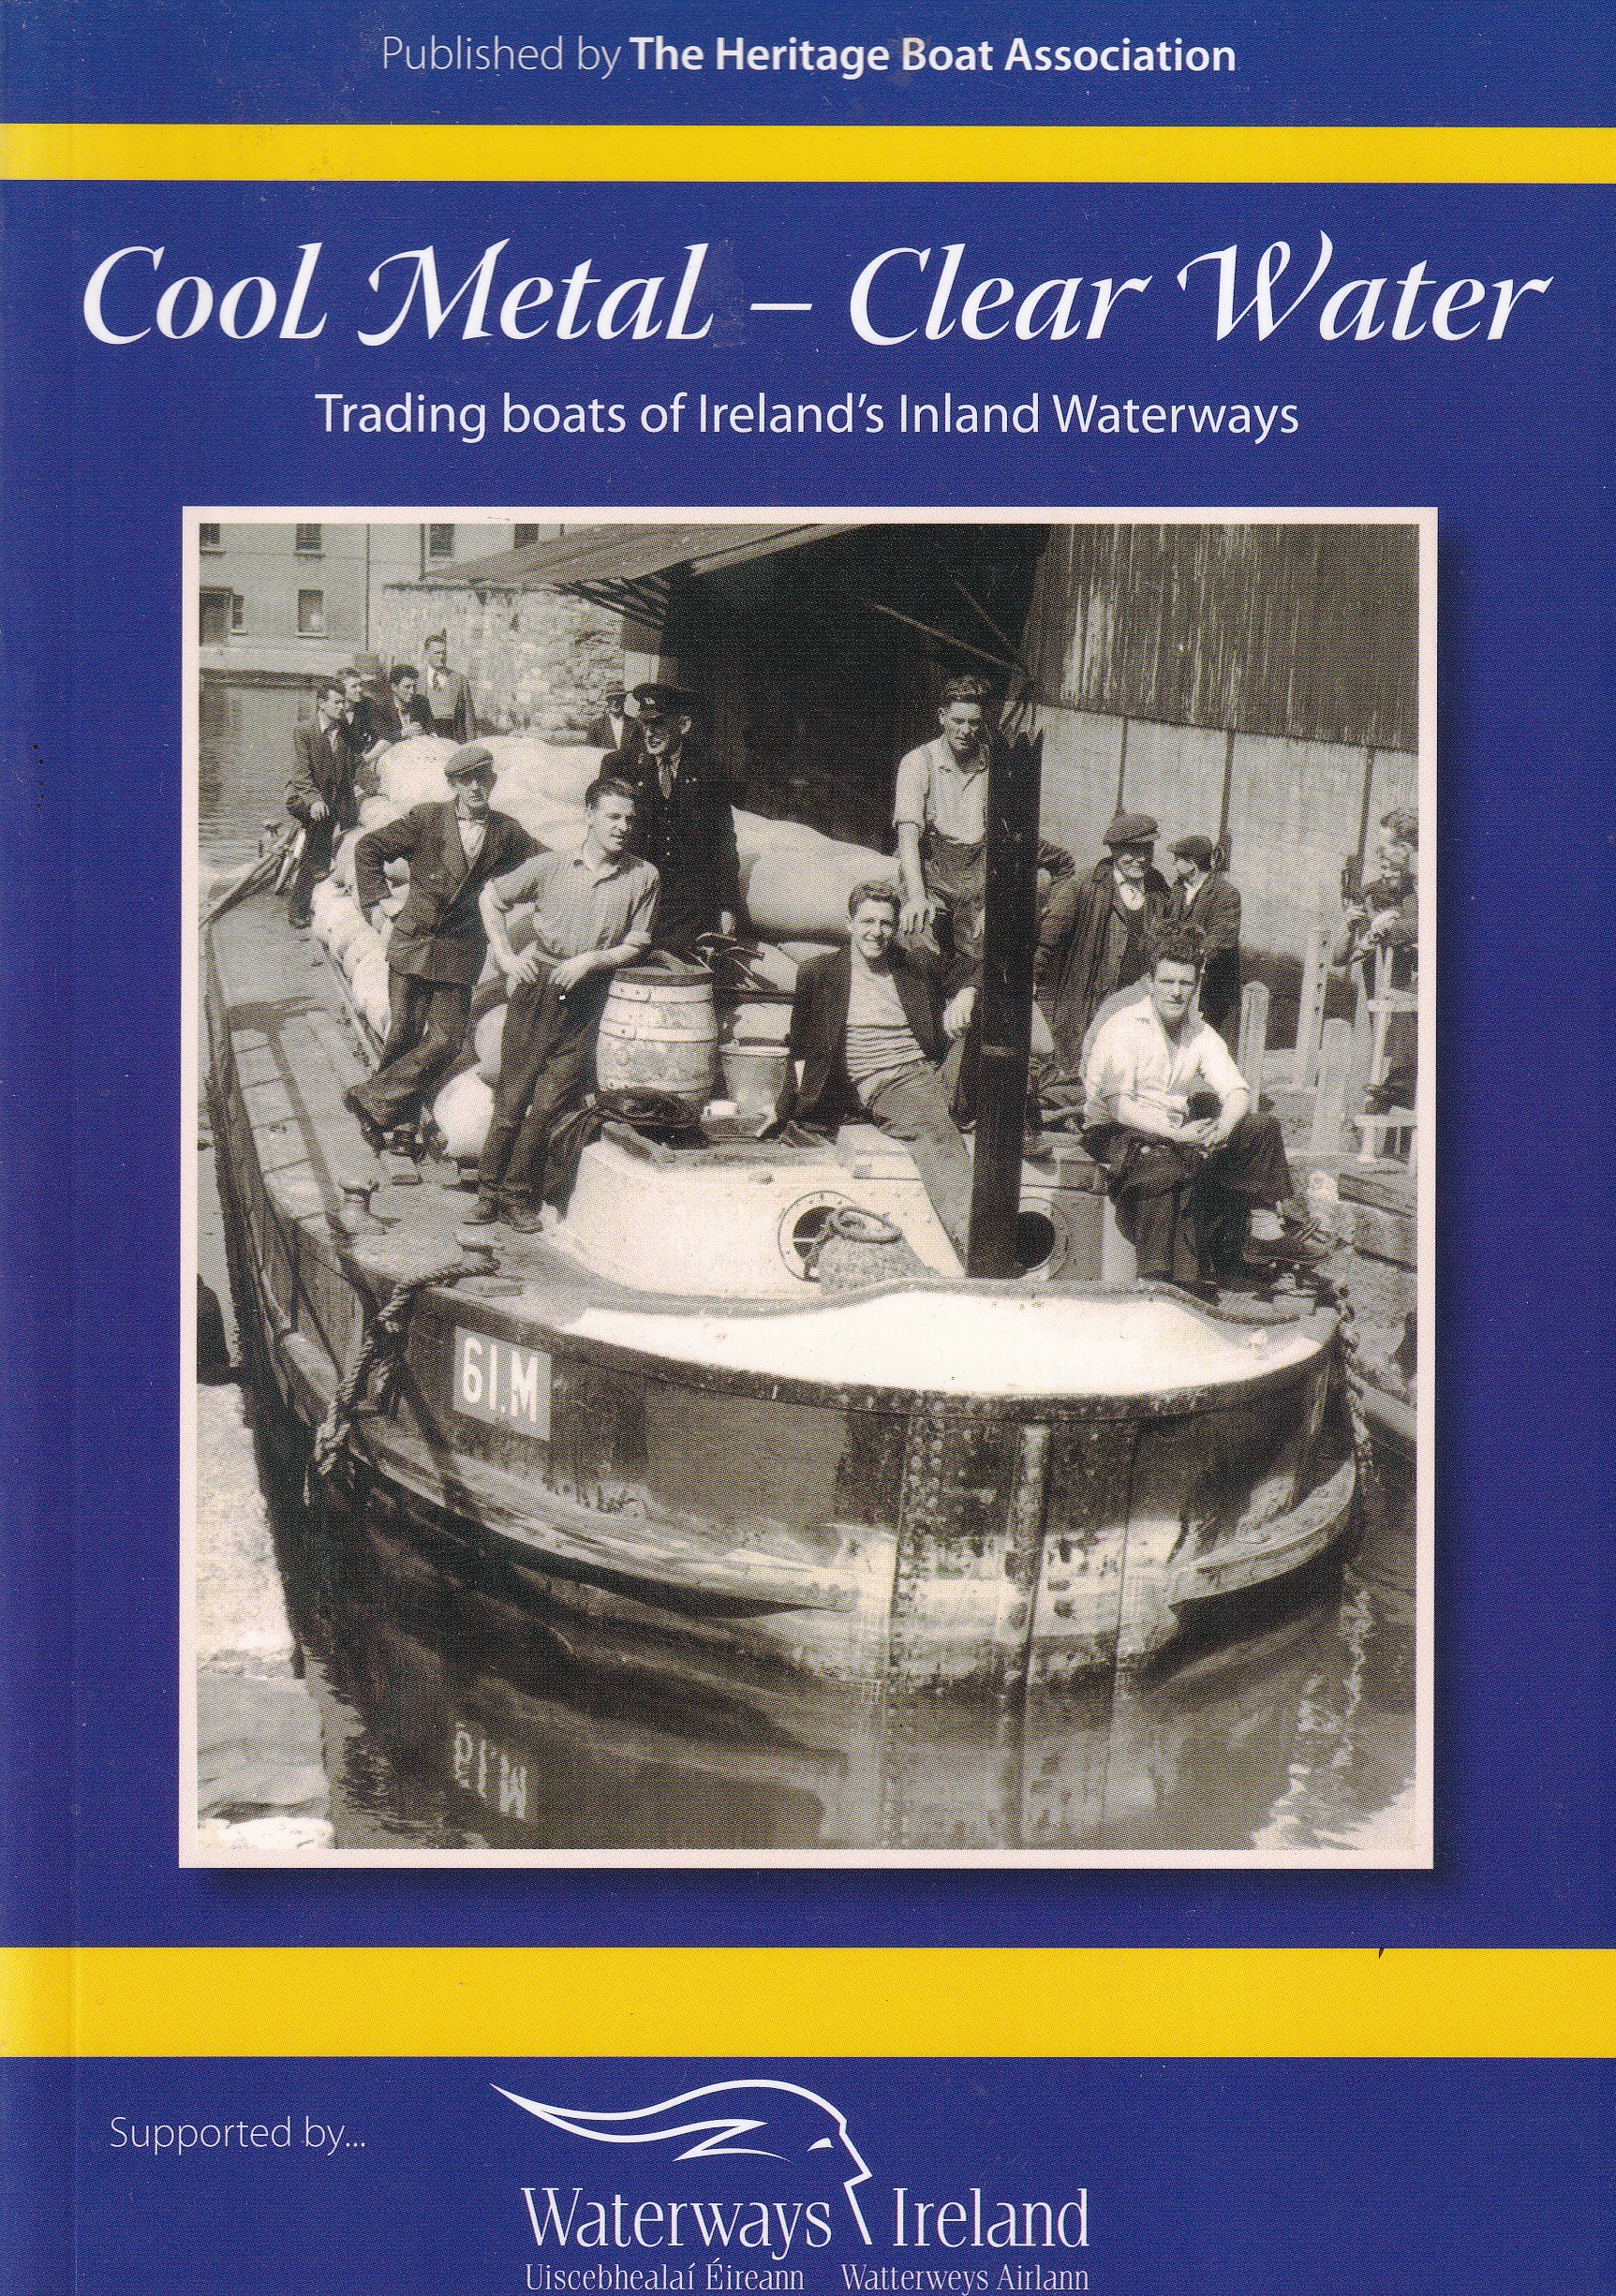 Cool Metal- Clear Water: Trading Boats of Ireland’s Inland Waterways | Heritage Boat Association | Charlie Byrne's